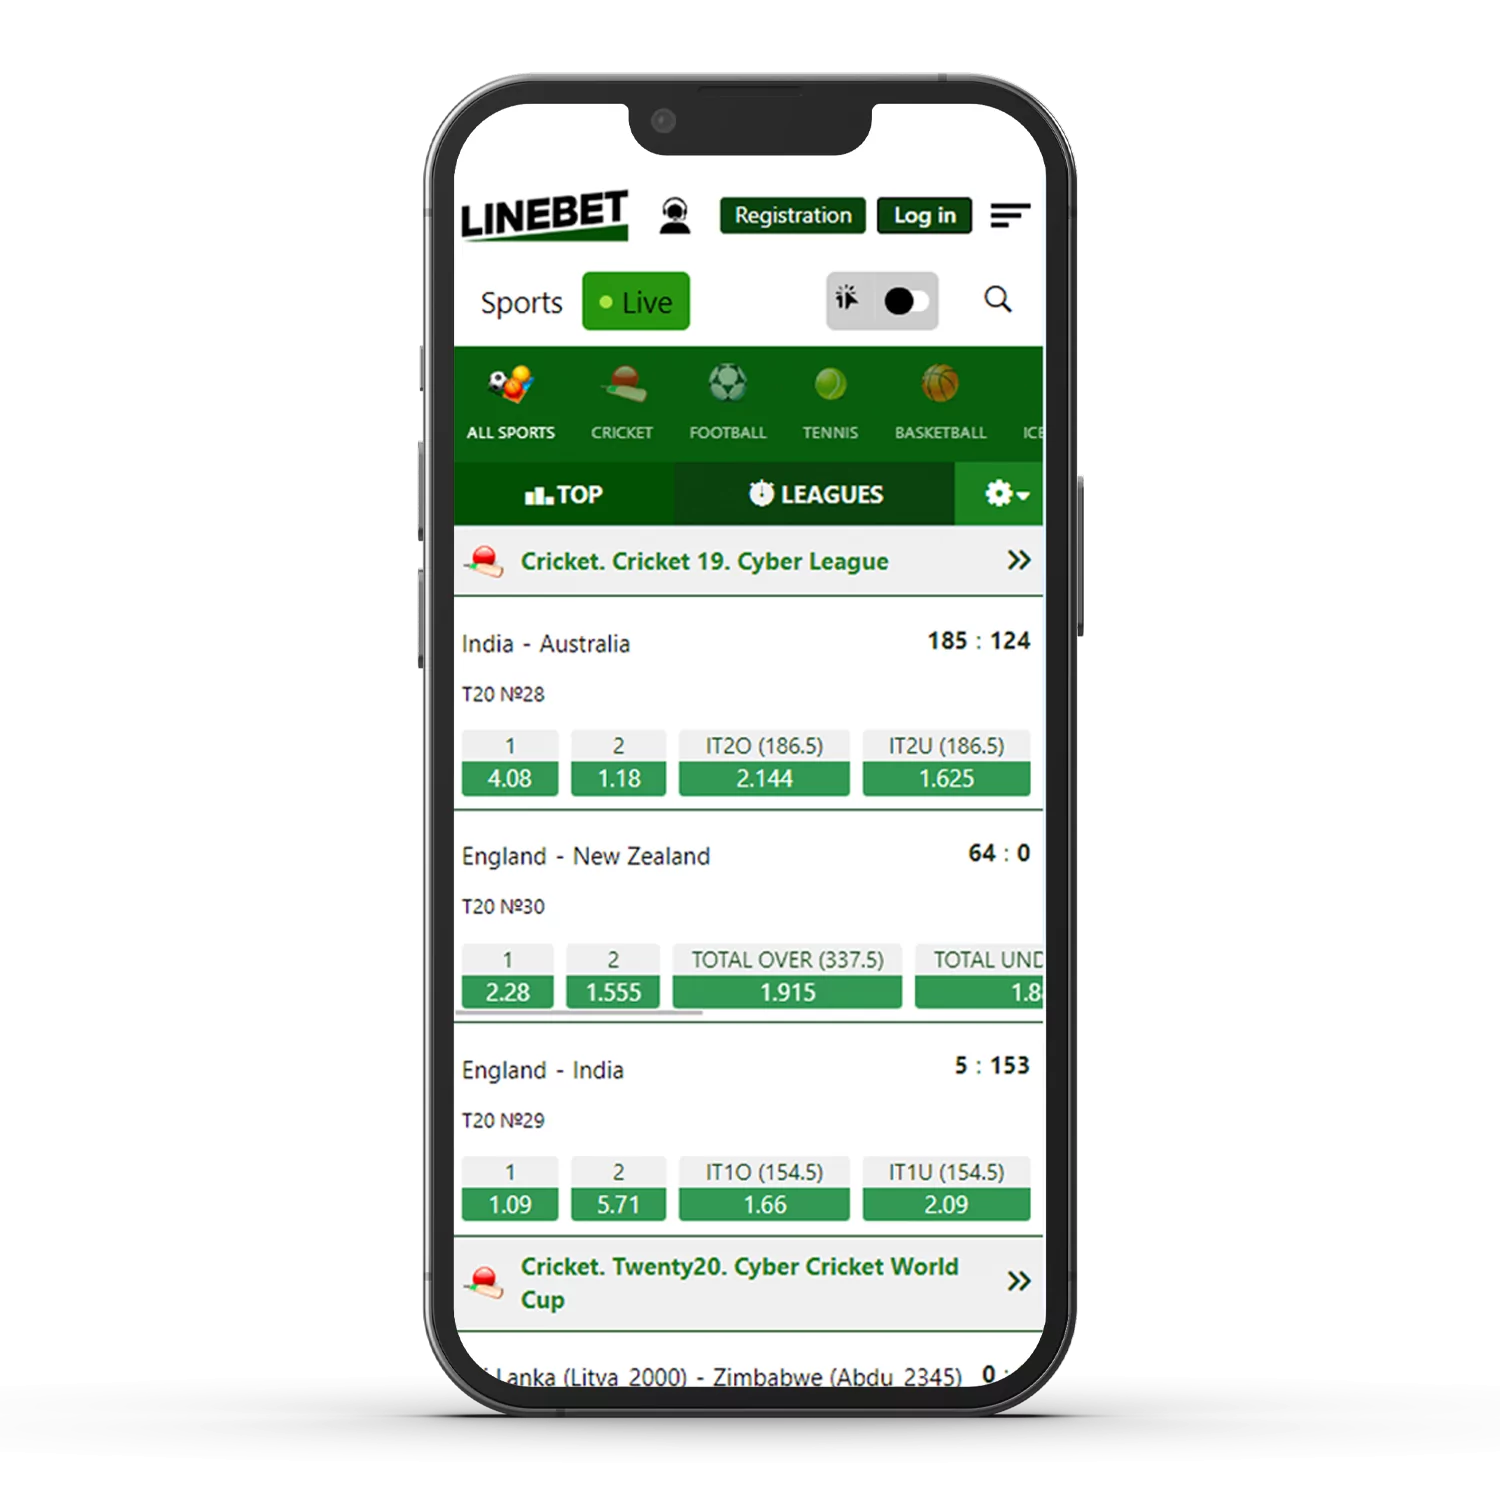 The Linebet app is available as a free download for Android and iOS.